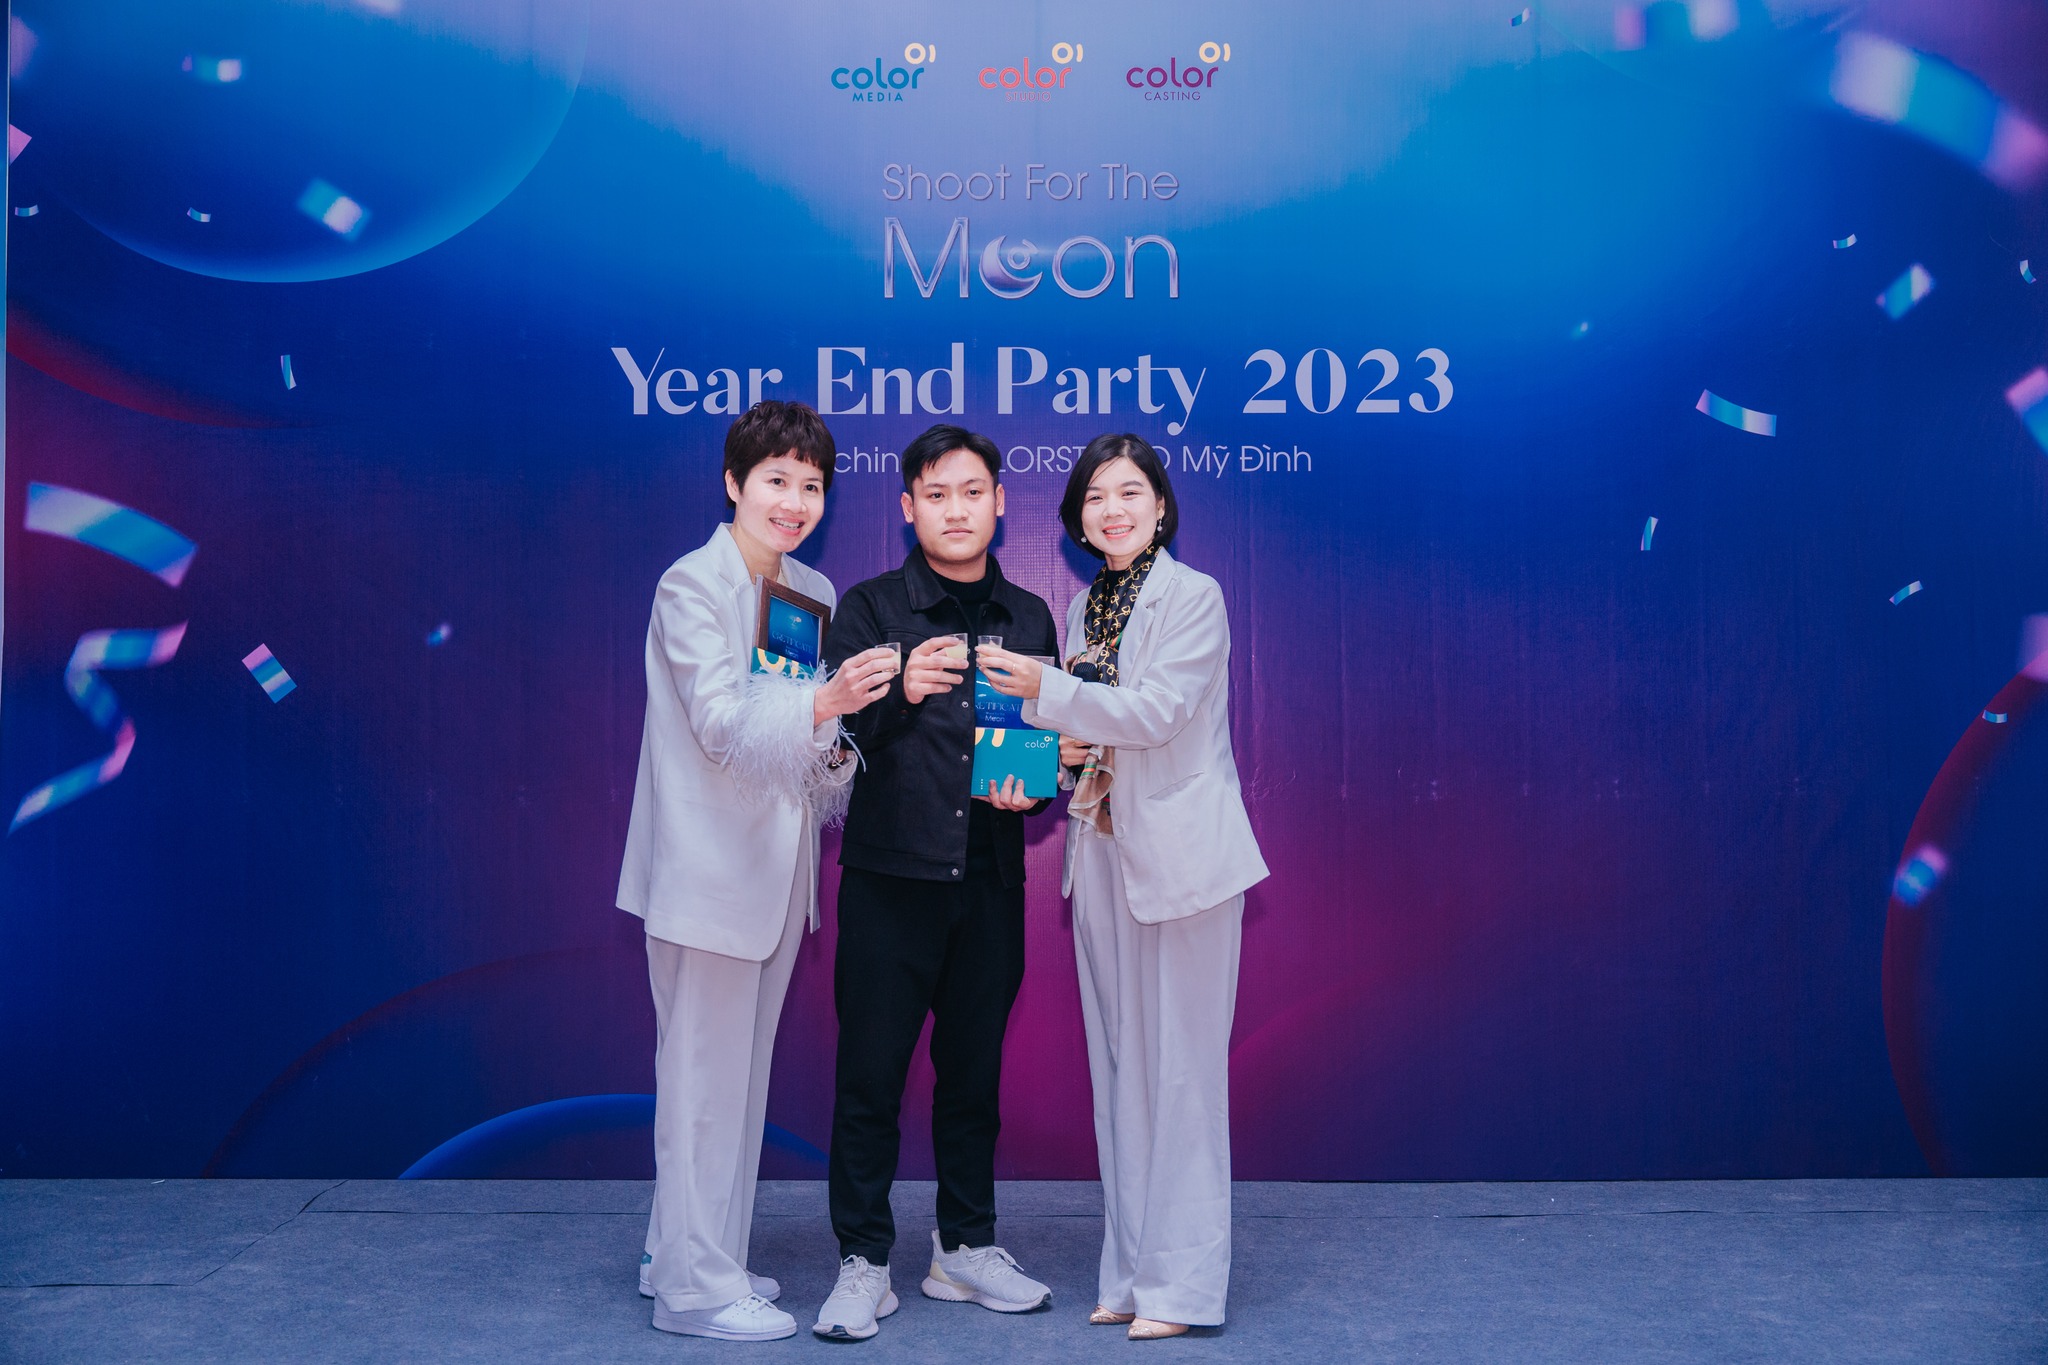 colormedia-yeat-end-party-2023 (3)